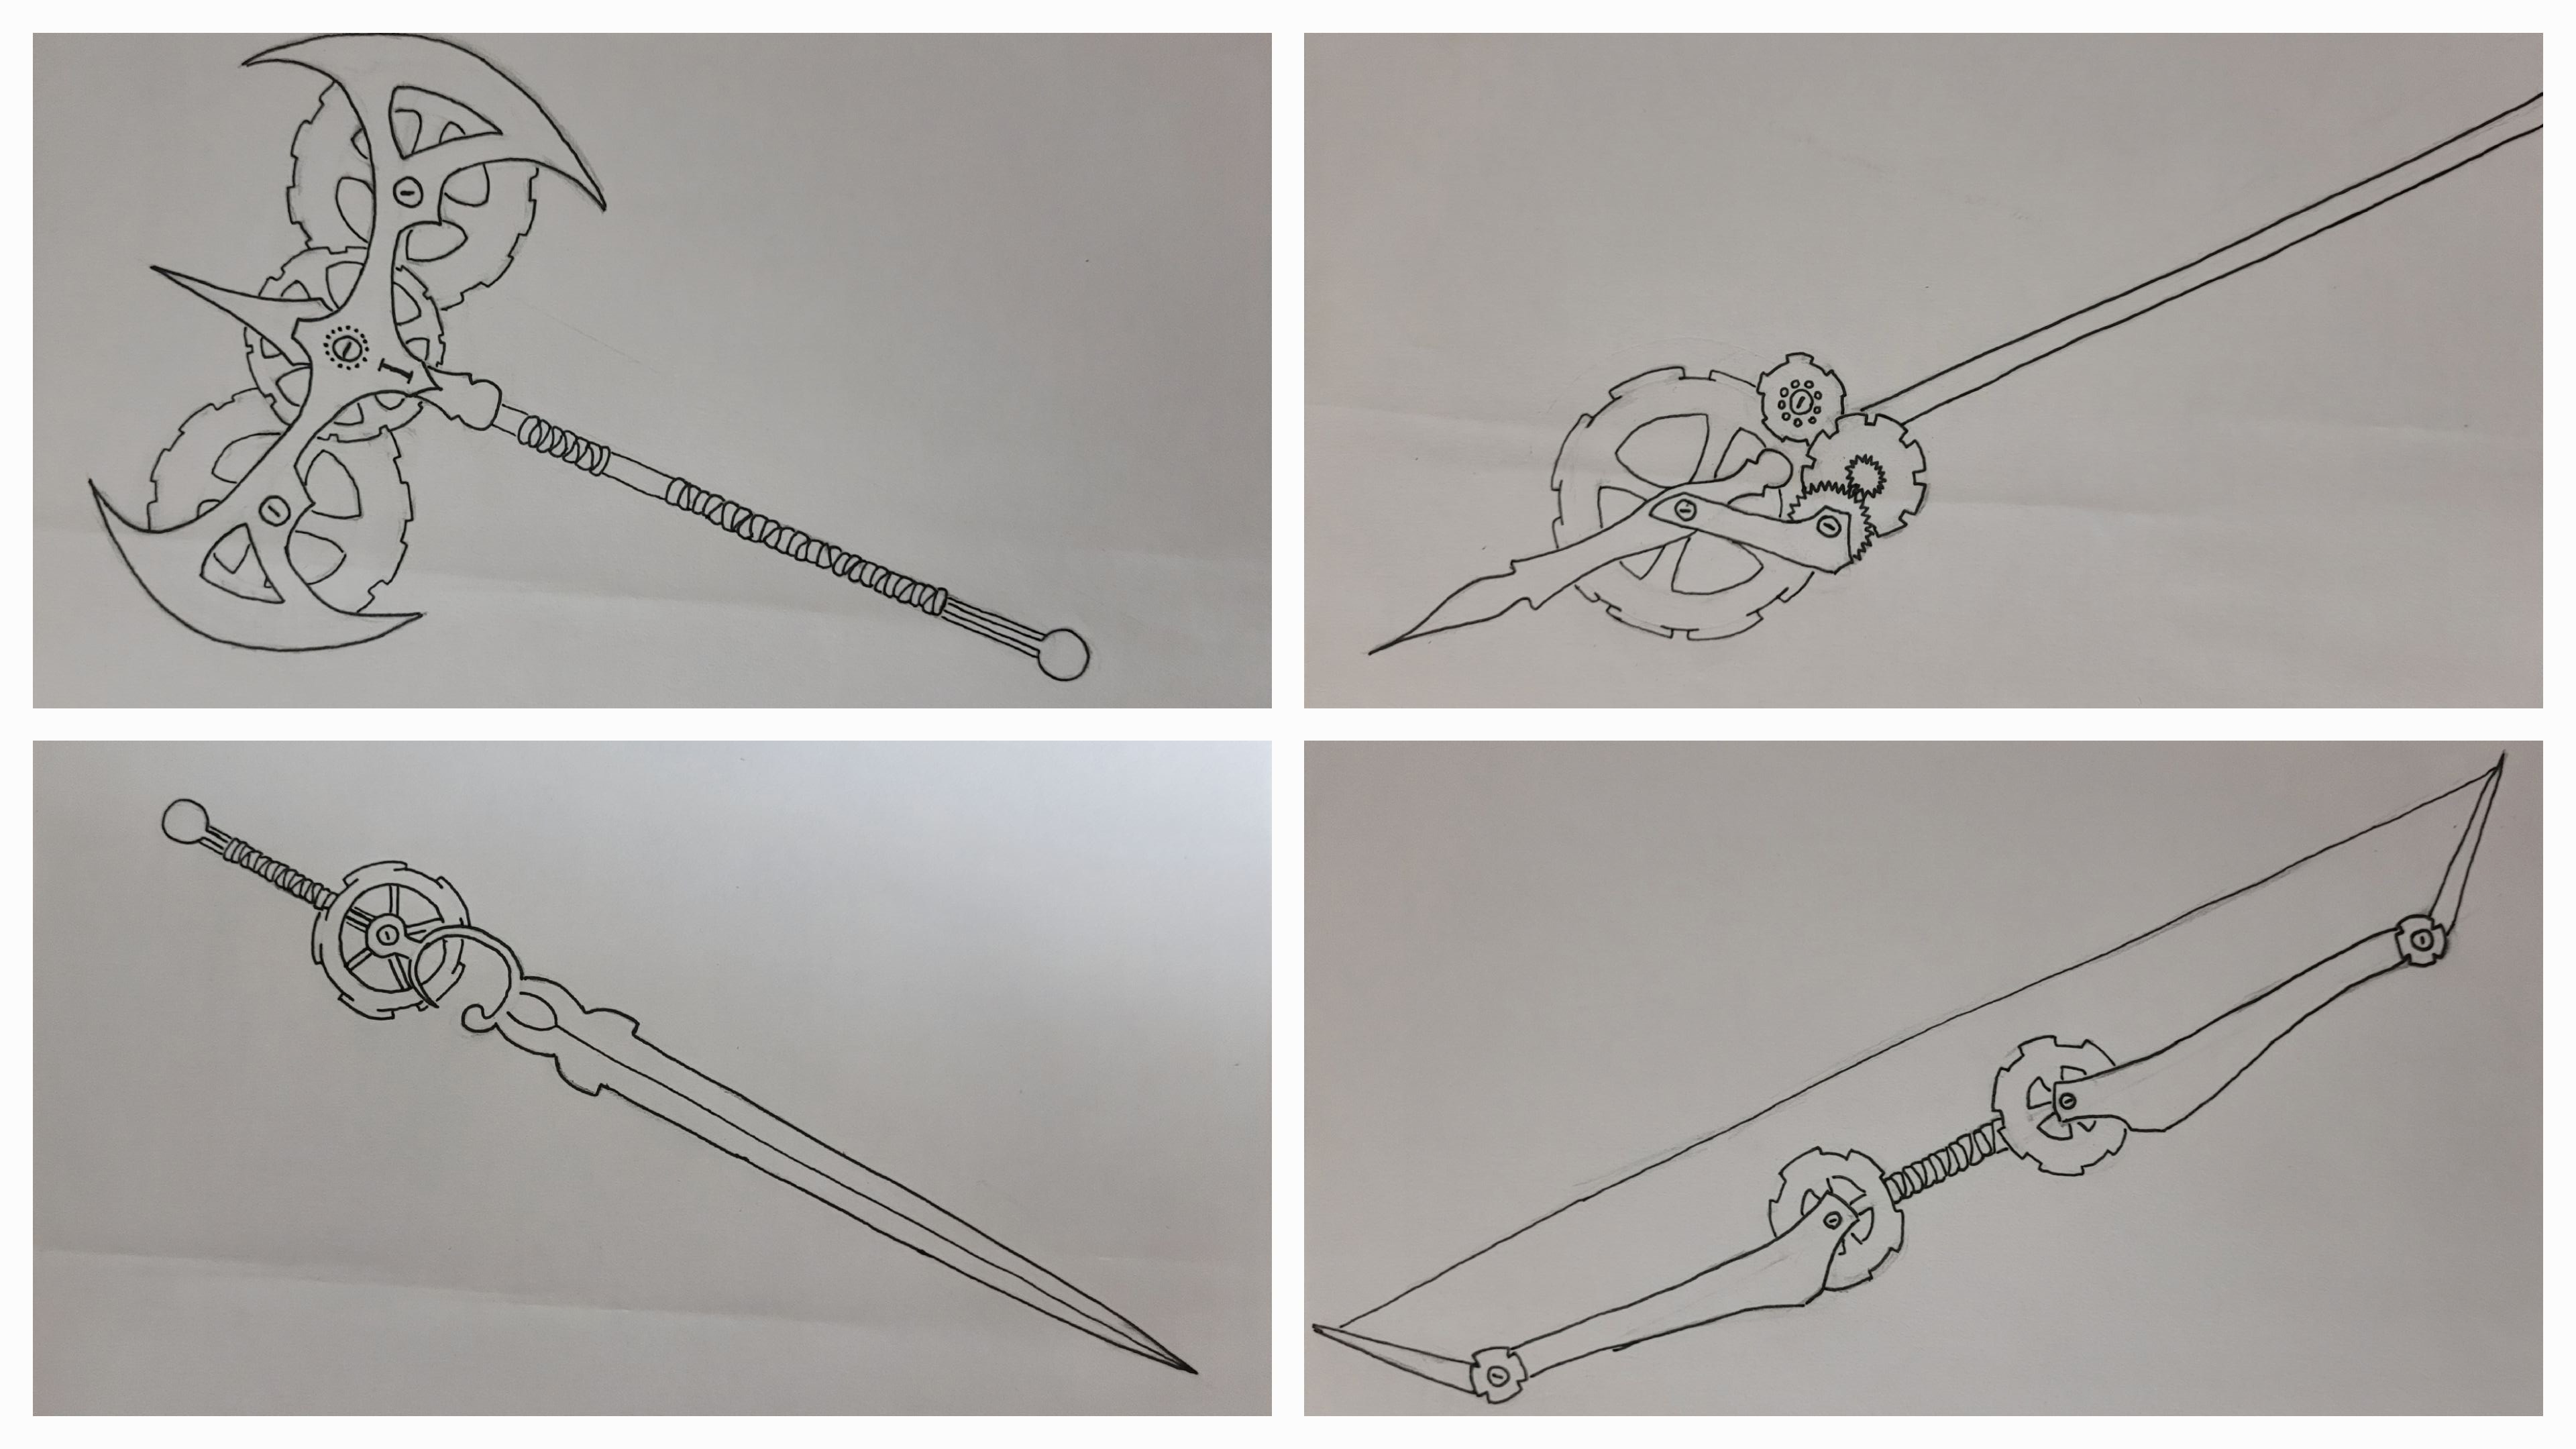 Four different drawings. One of a sword, another as an ax, a third as a spear, and the last one being a bow. All are made up of gears and other clockwork pieces.